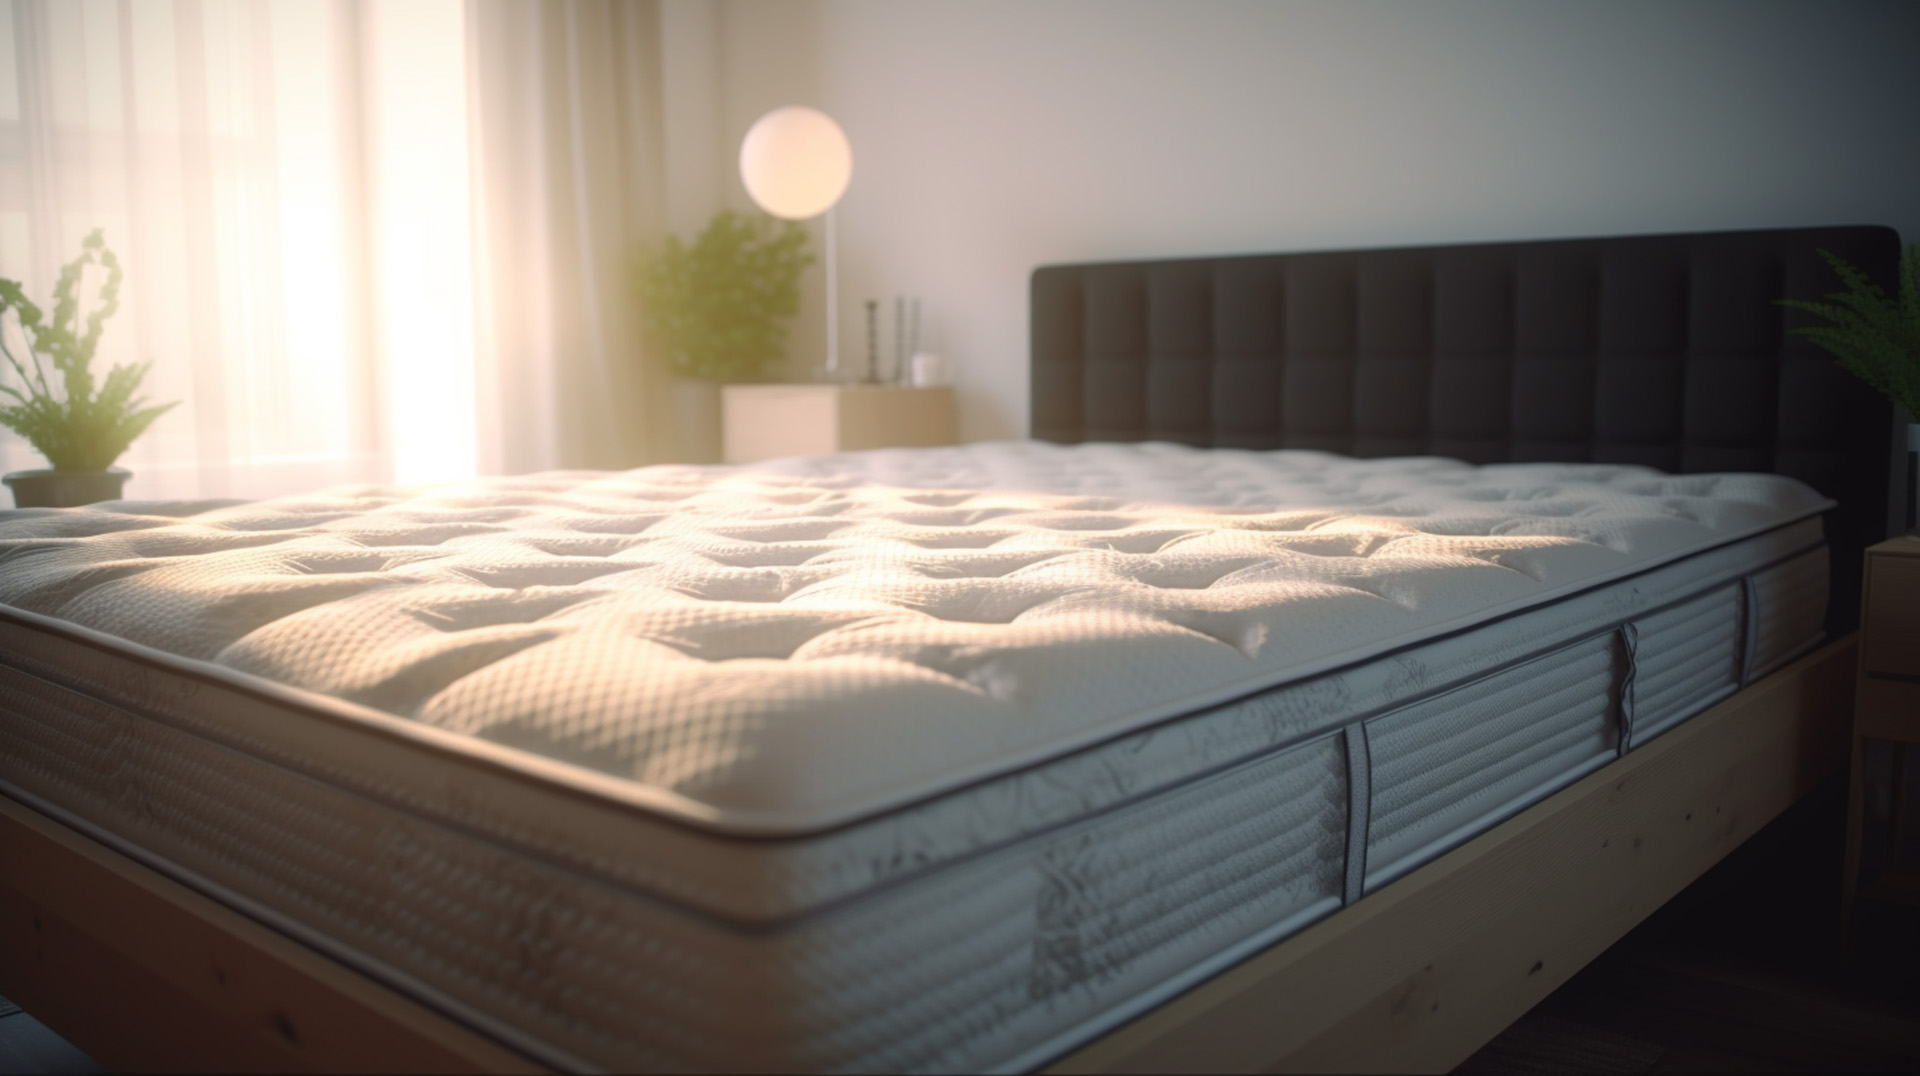 Shop Organic Mattresses and Beds in Riverton, UT